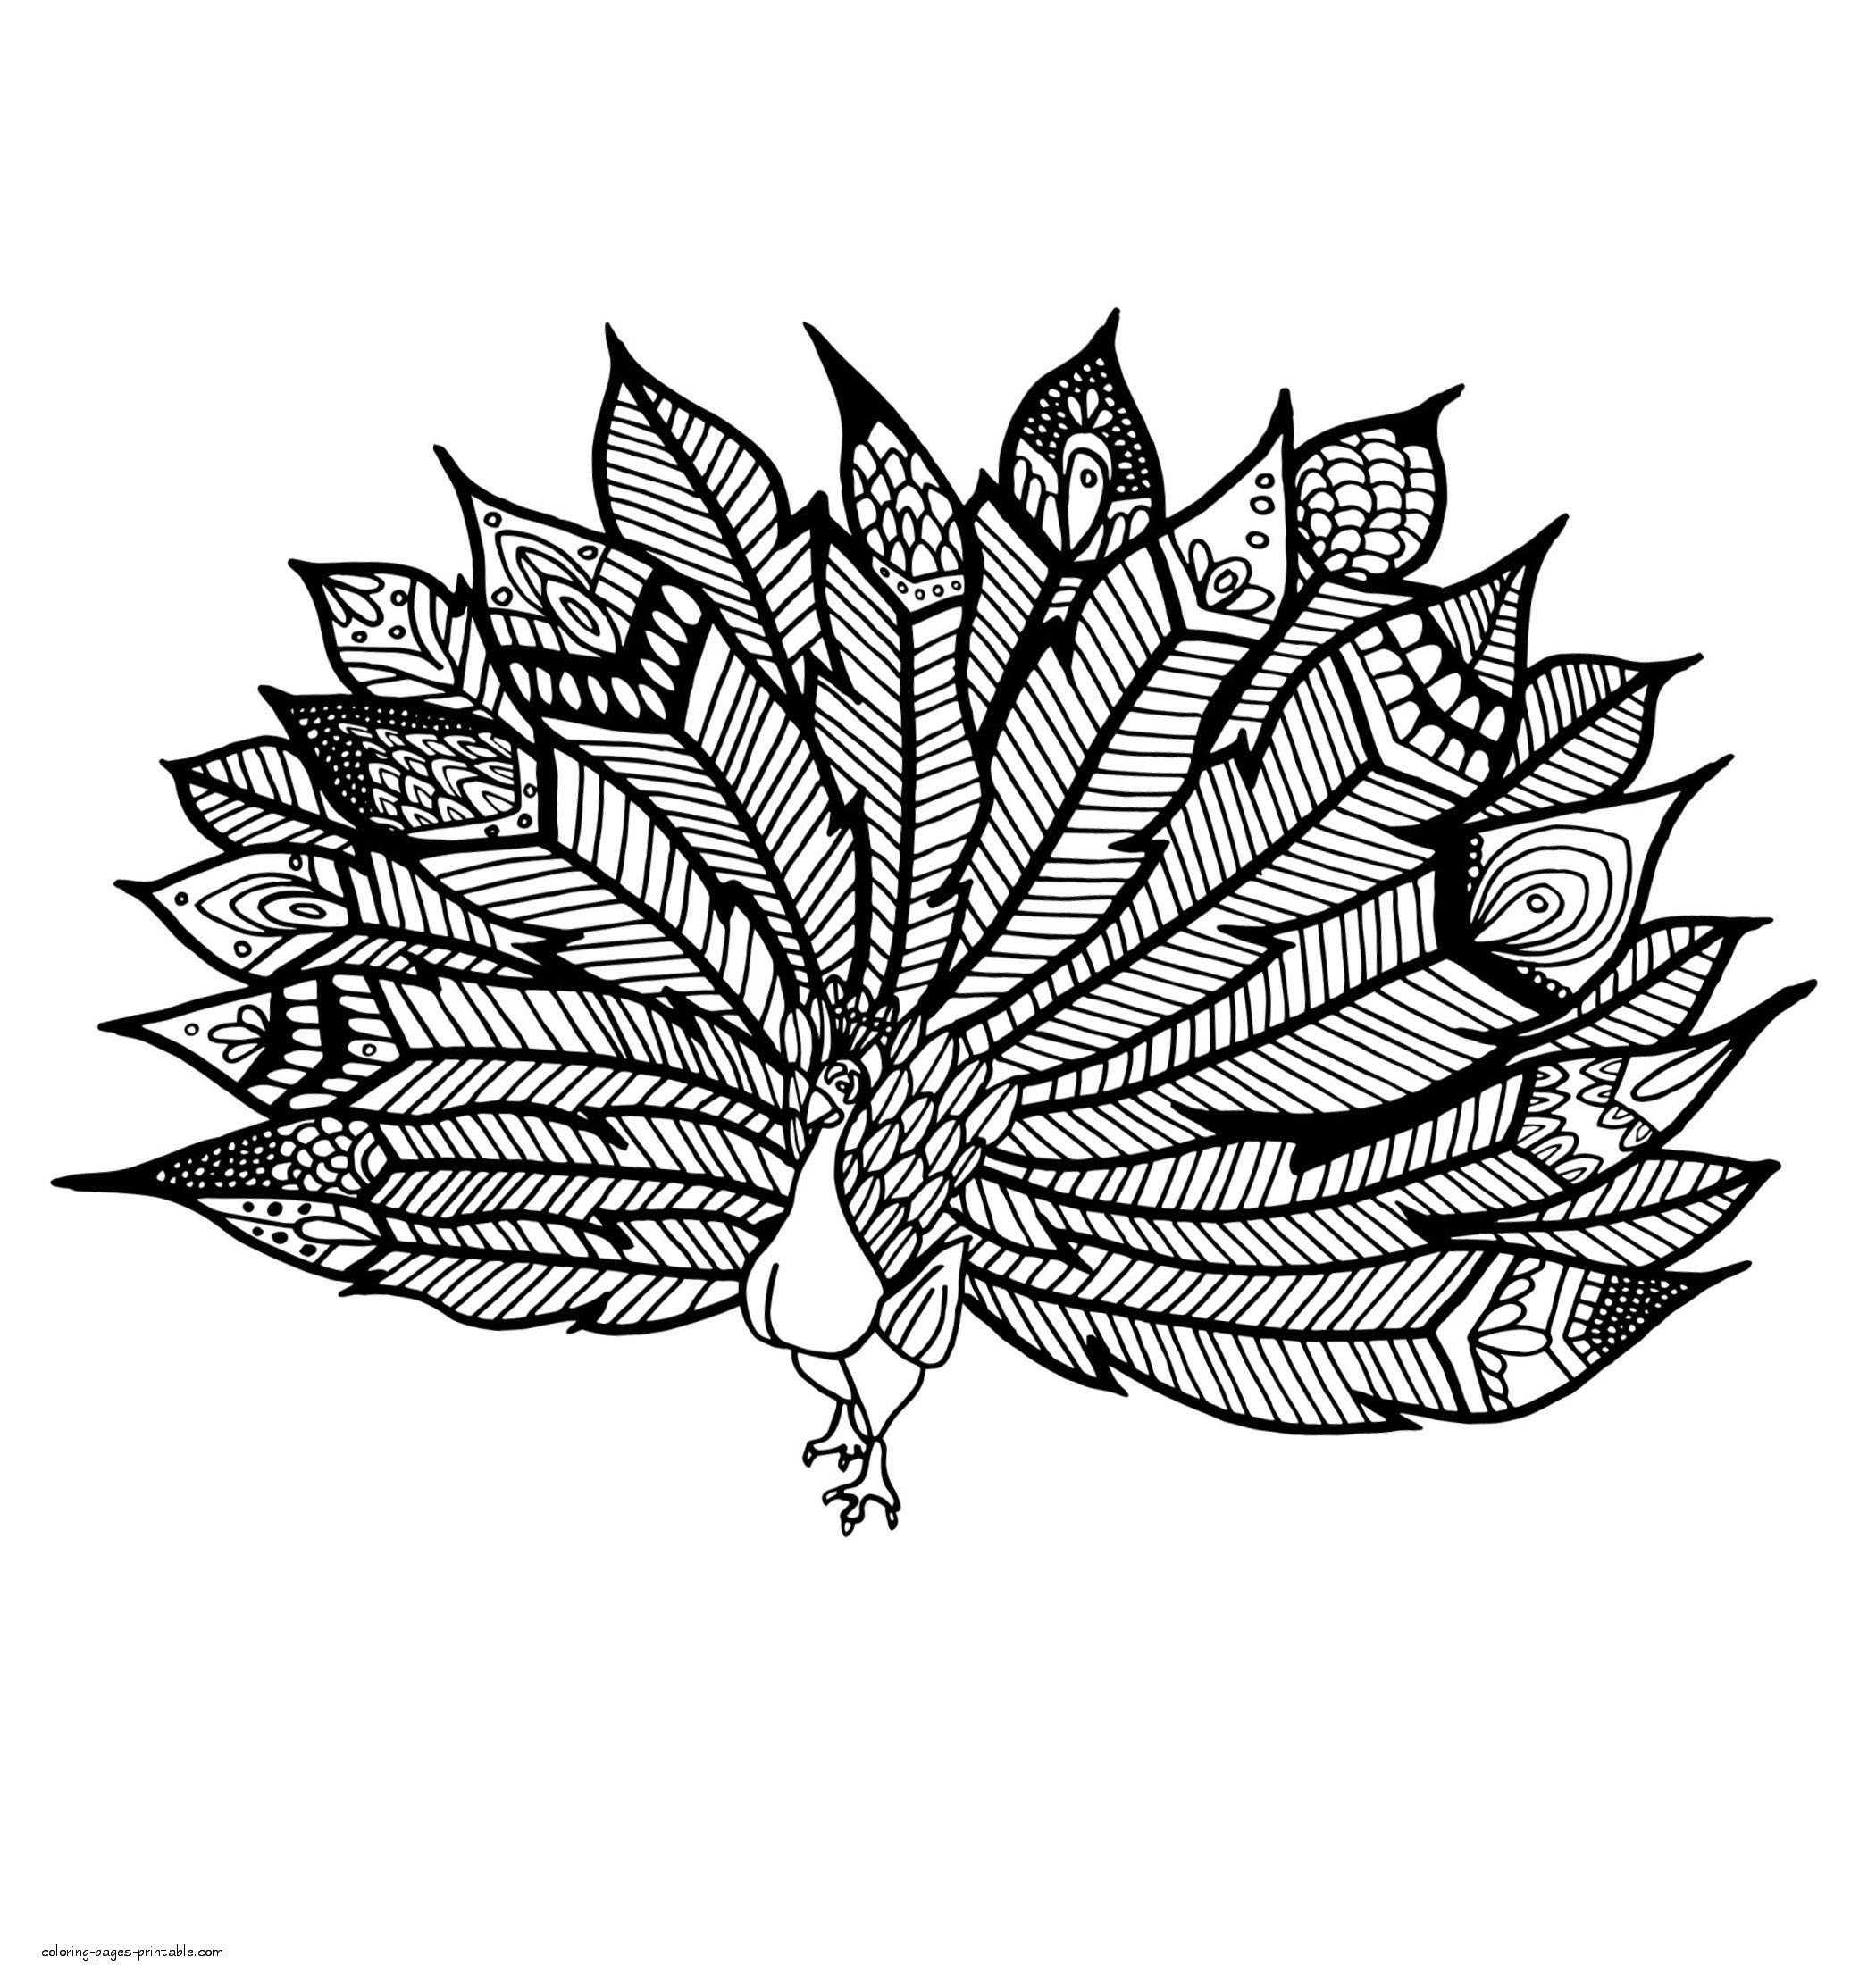 Peacock Coloring Page For Adults That You Can Print